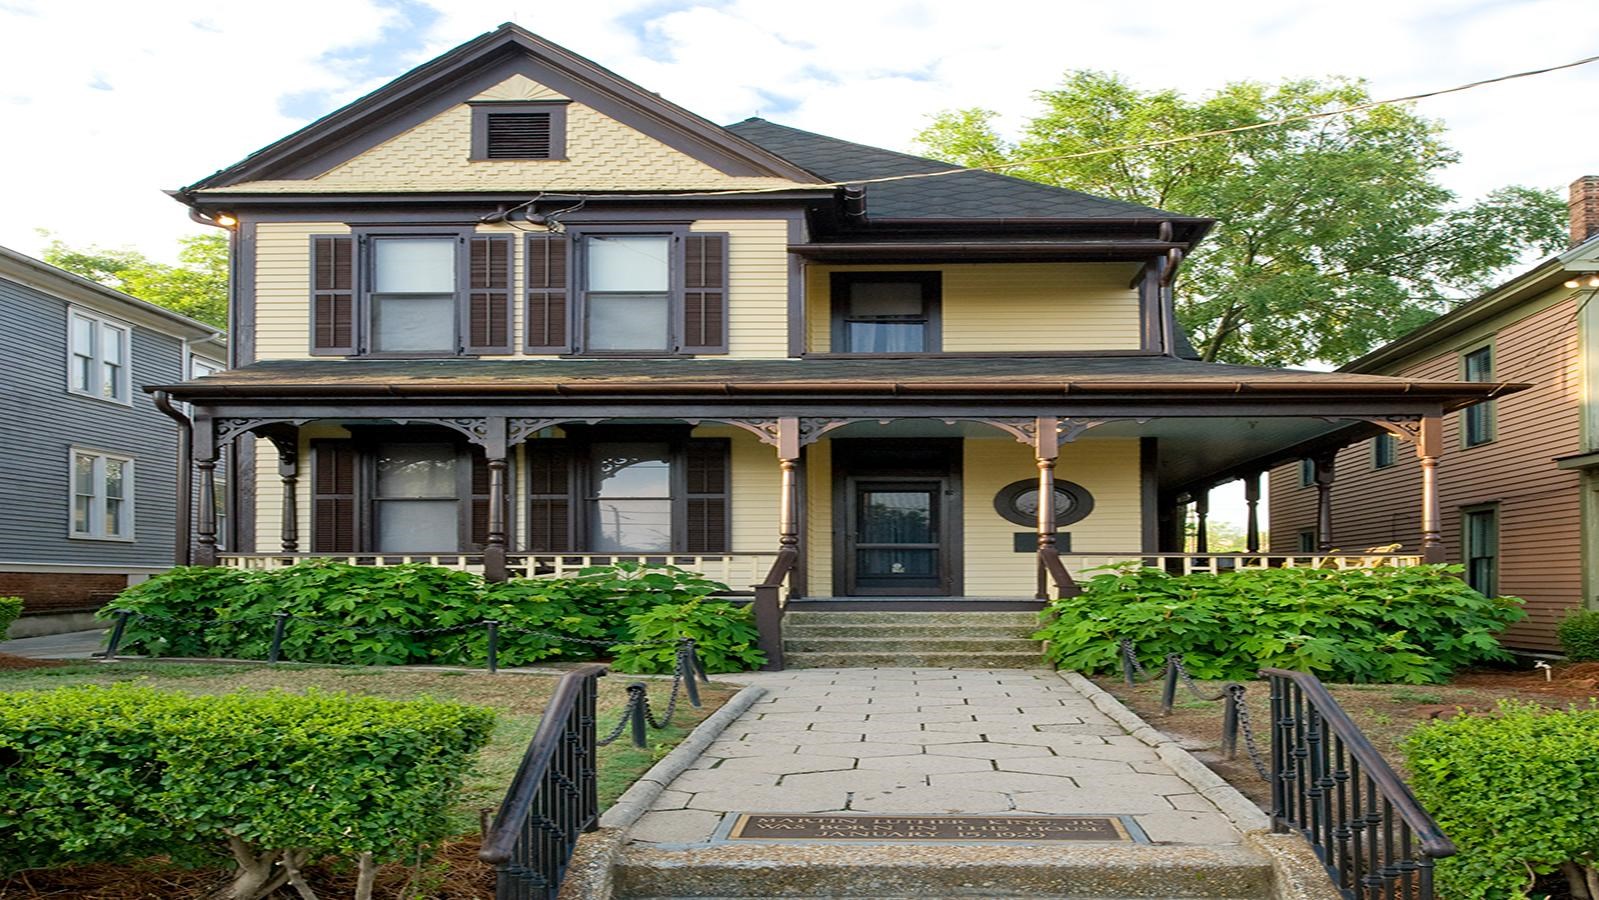 Two story Queen-Anne styled home where Martin Luther King, Jr. was born.